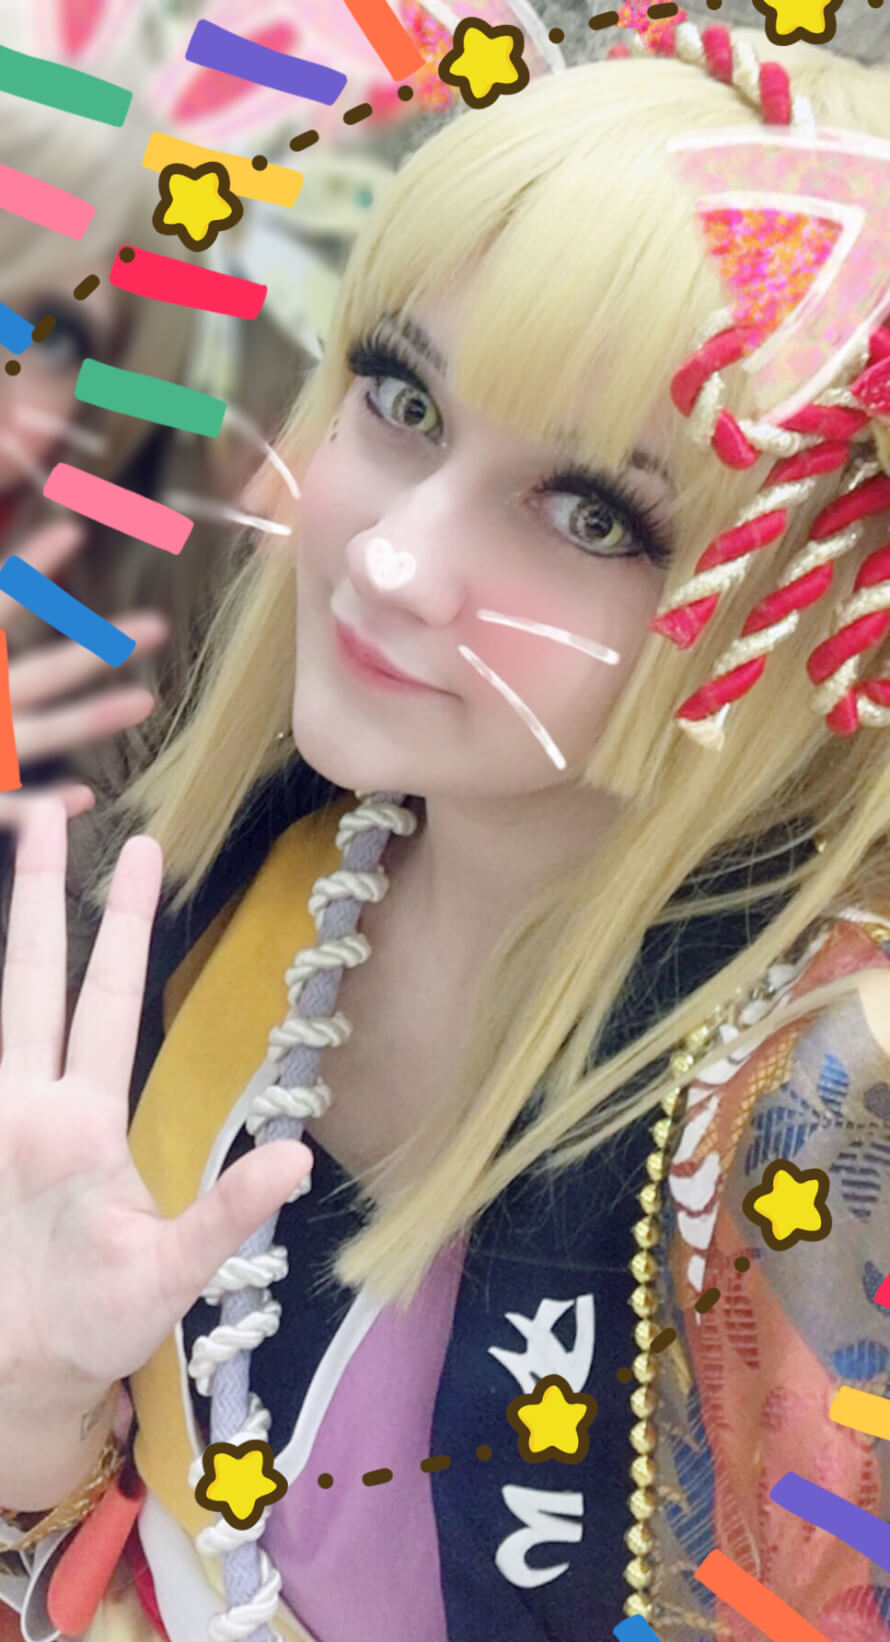 I’m not sure how it works, but I wanted to show a lil bit of my Kokoro cosplay! Hope you enjoy...